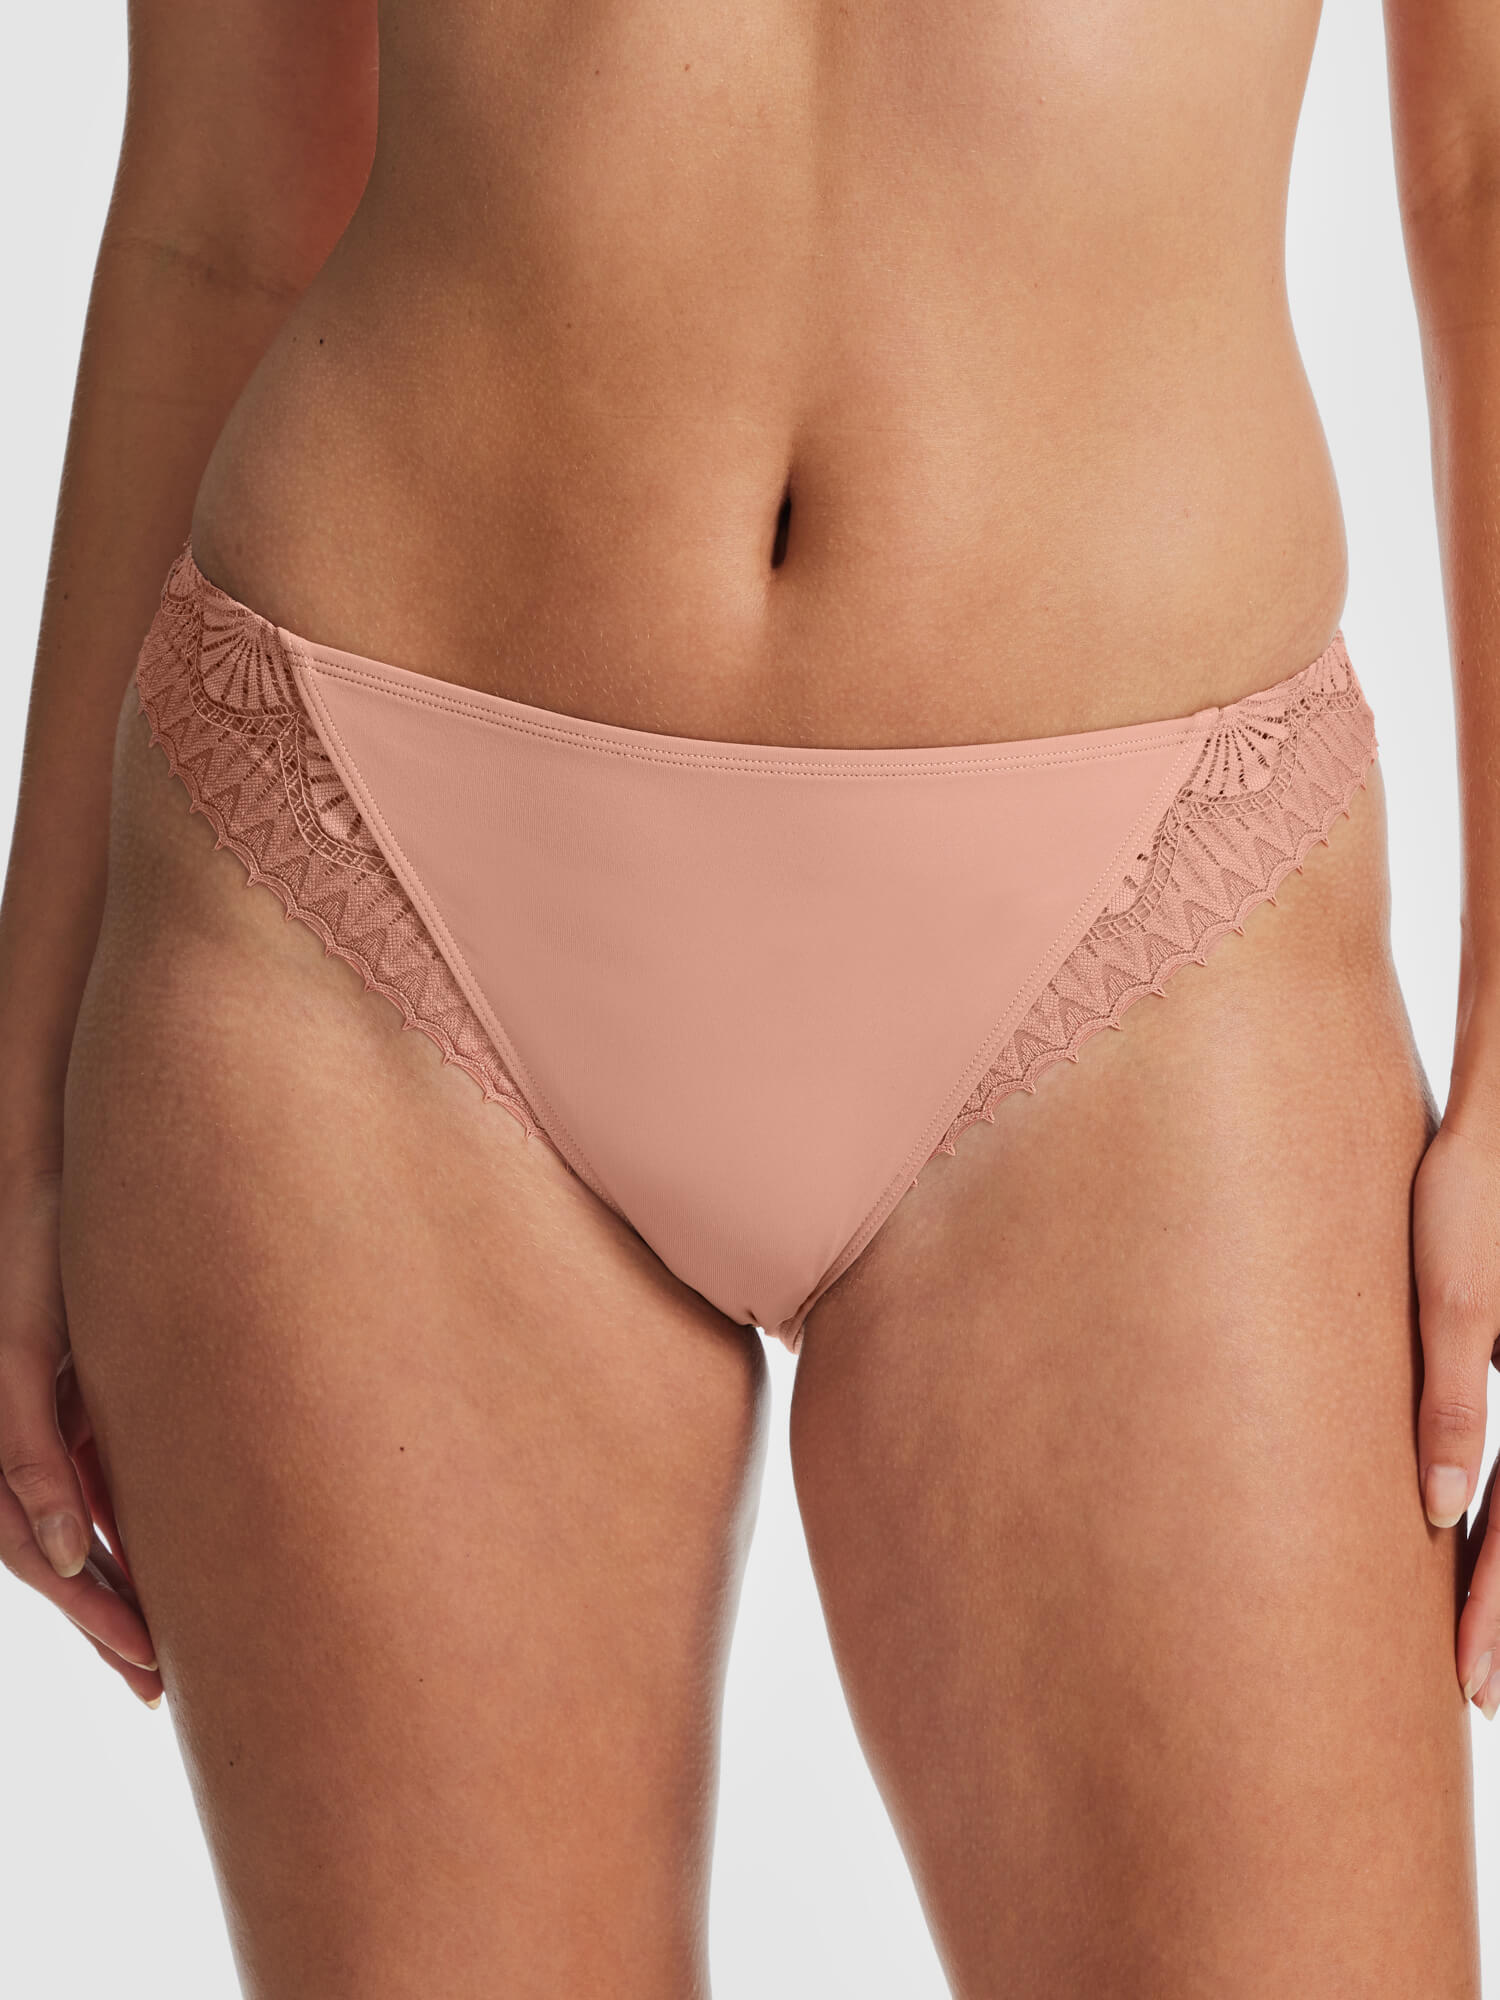 Daydream Lace High Cut Brief - Nude - Fine Lines Lingerie